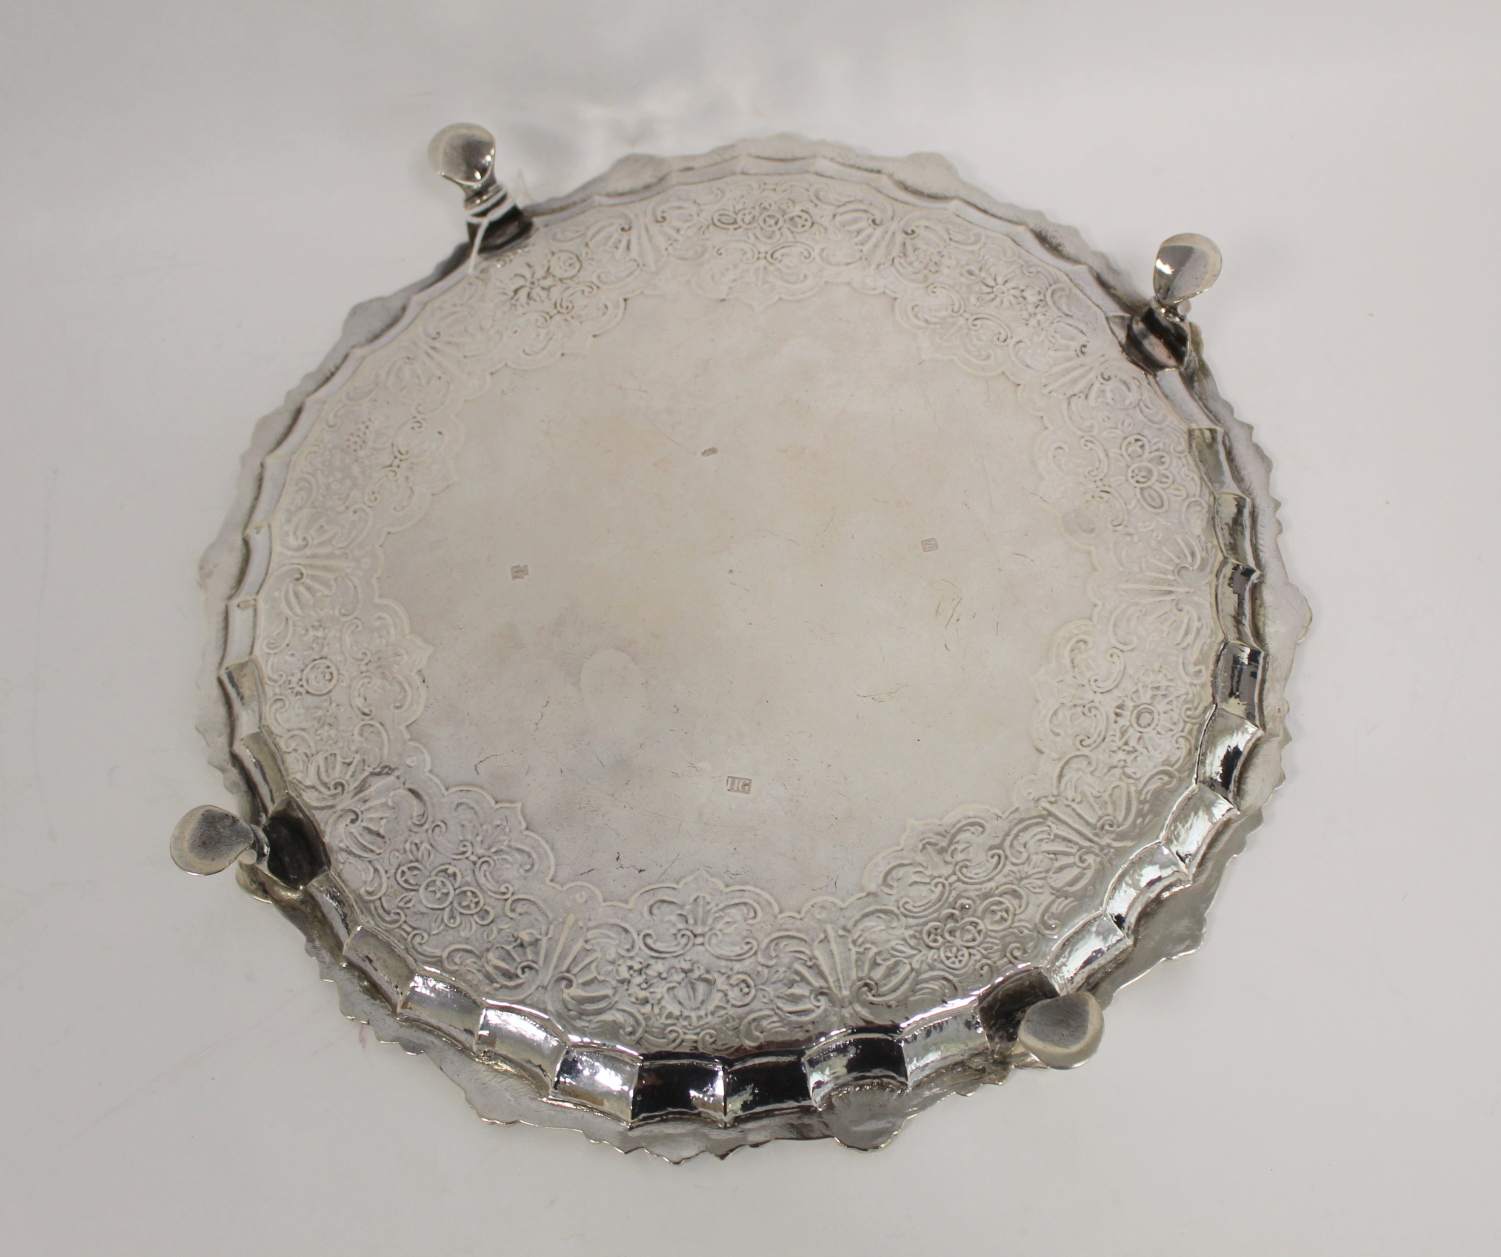 Silver circular tray with shaped moulded and scallop border, embossed with scrolls, flowers and - Image 2 of 4